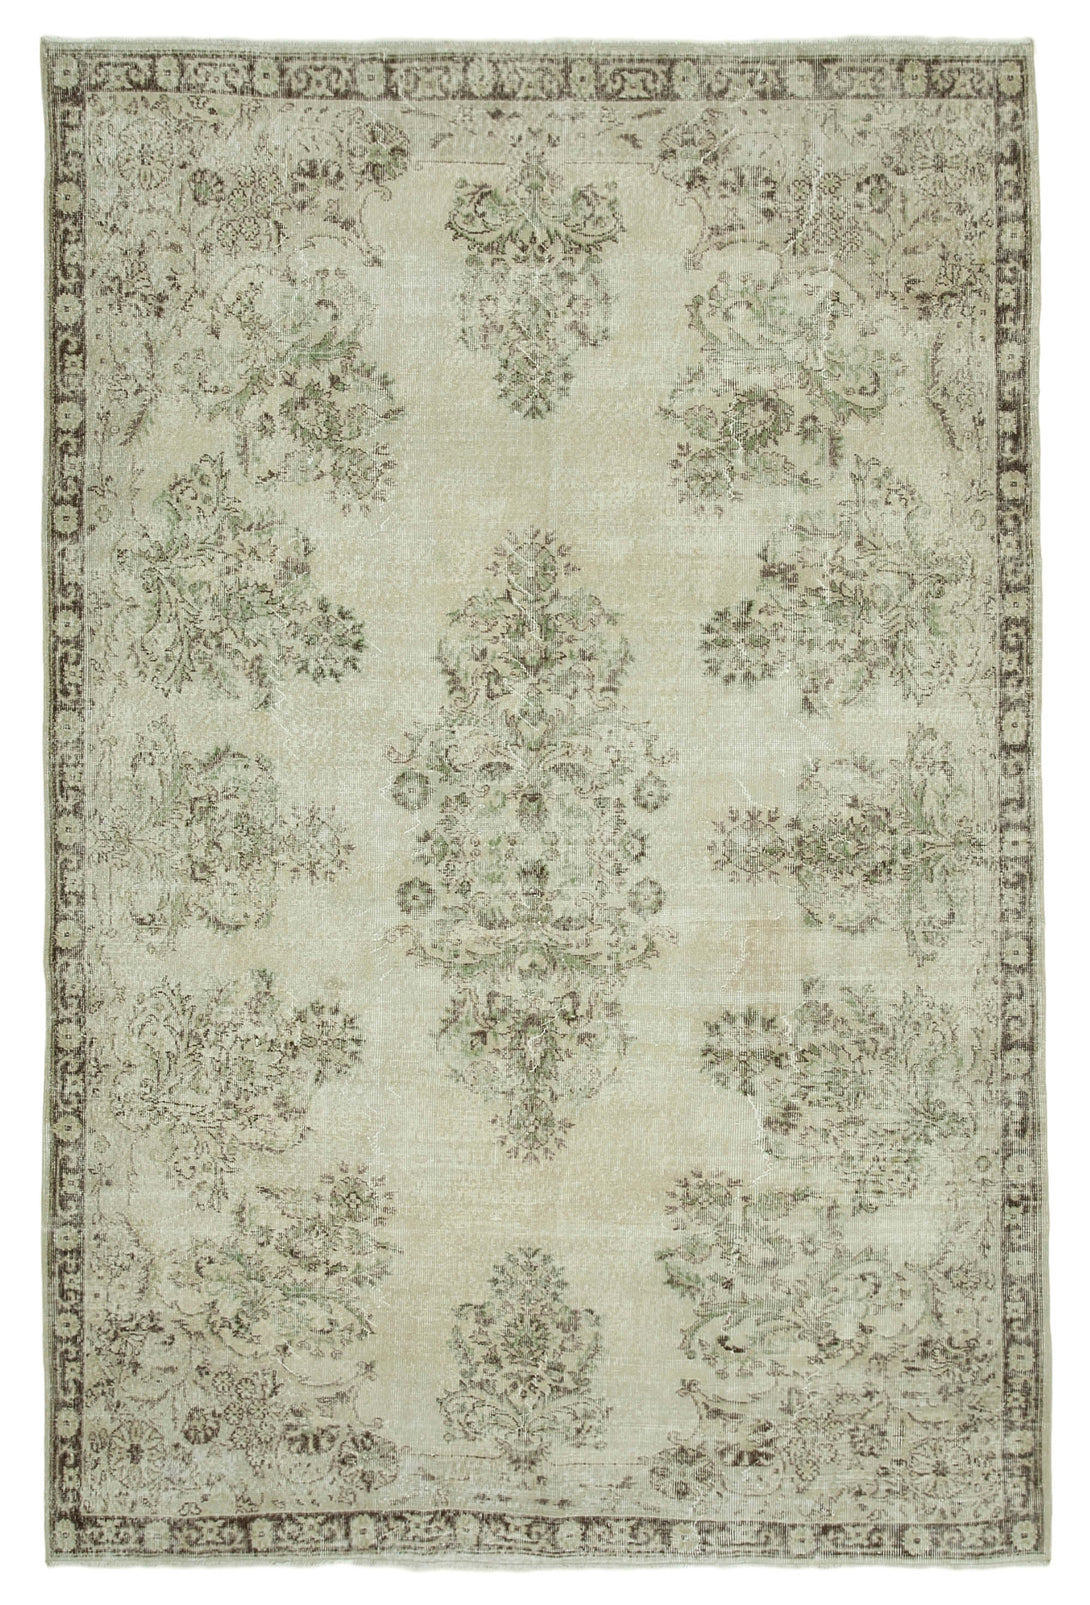 Handmade White Wash Area Rug > Design# OL-AC-36769 > Size: 6'-11" x 10'-6", Carpet Culture Rugs, Handmade Rugs, NYC Rugs, New Rugs, Shop Rugs, Rug Store, Outlet Rugs, SoHo Rugs, Rugs in USA